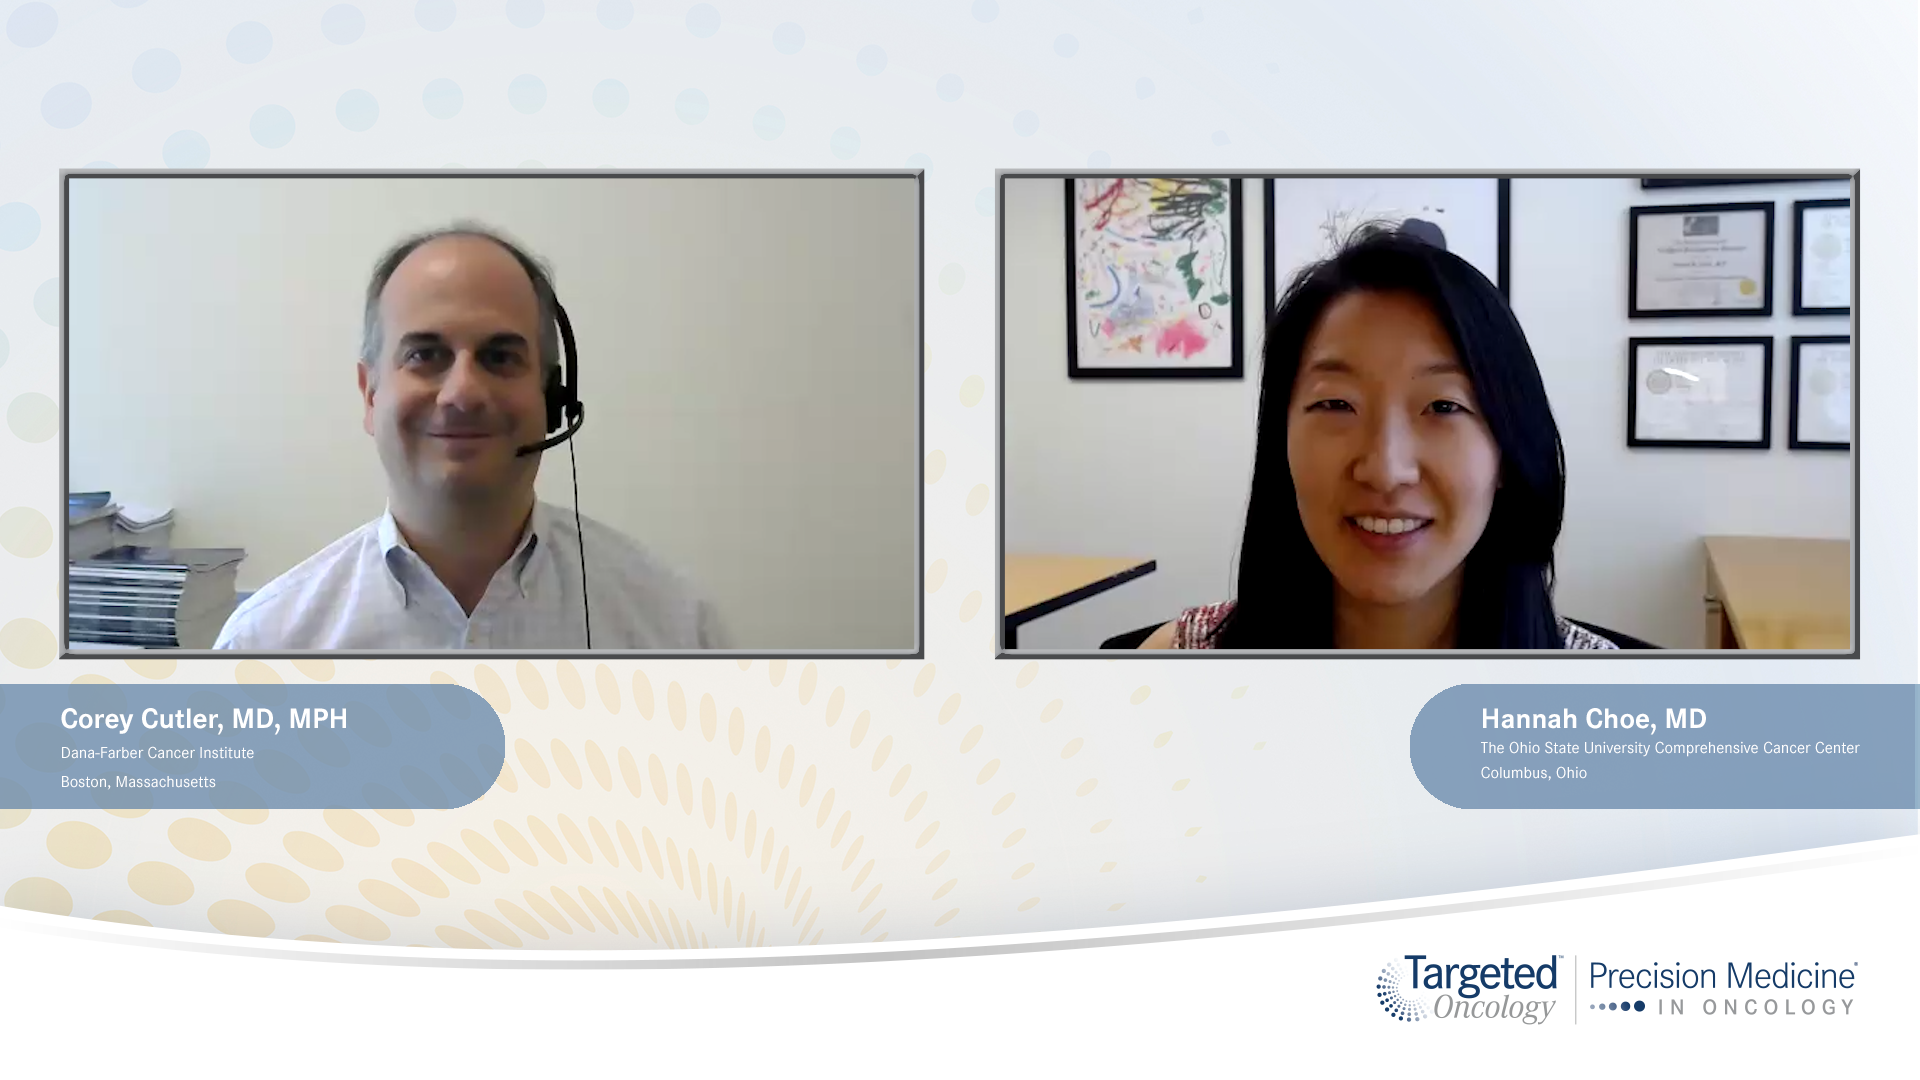 Corey Cutler, MD, MPH, and Hannah Choe, MD, experts on GVHD